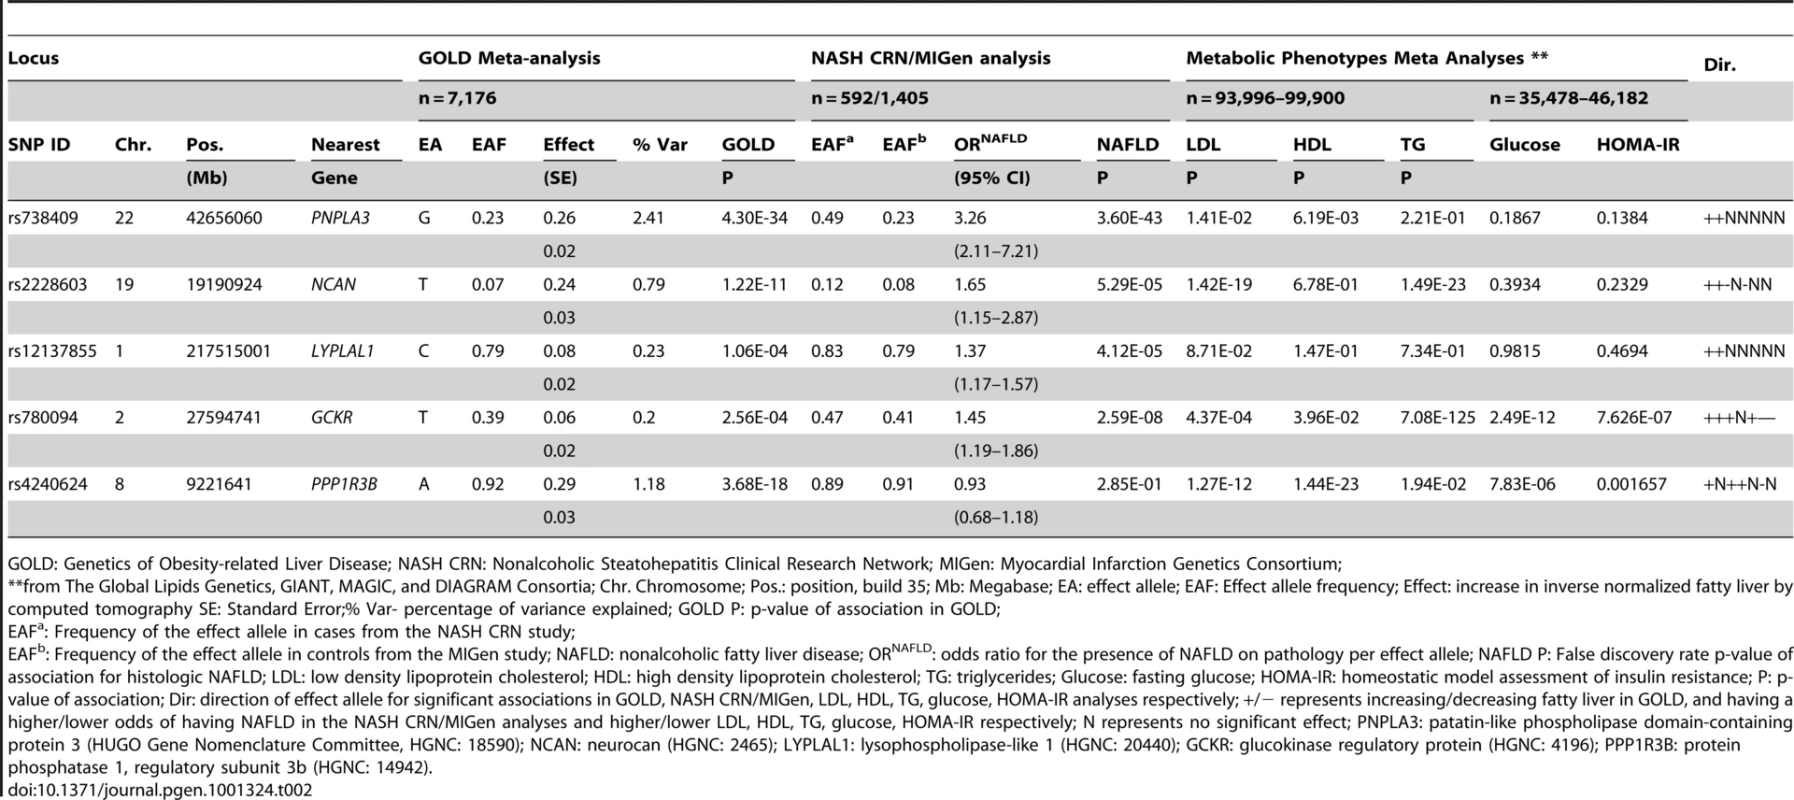 Genome-wide significant or replicating variants from GOLD, NASH CRN/MIGen, and metabolic phenotype analyses.